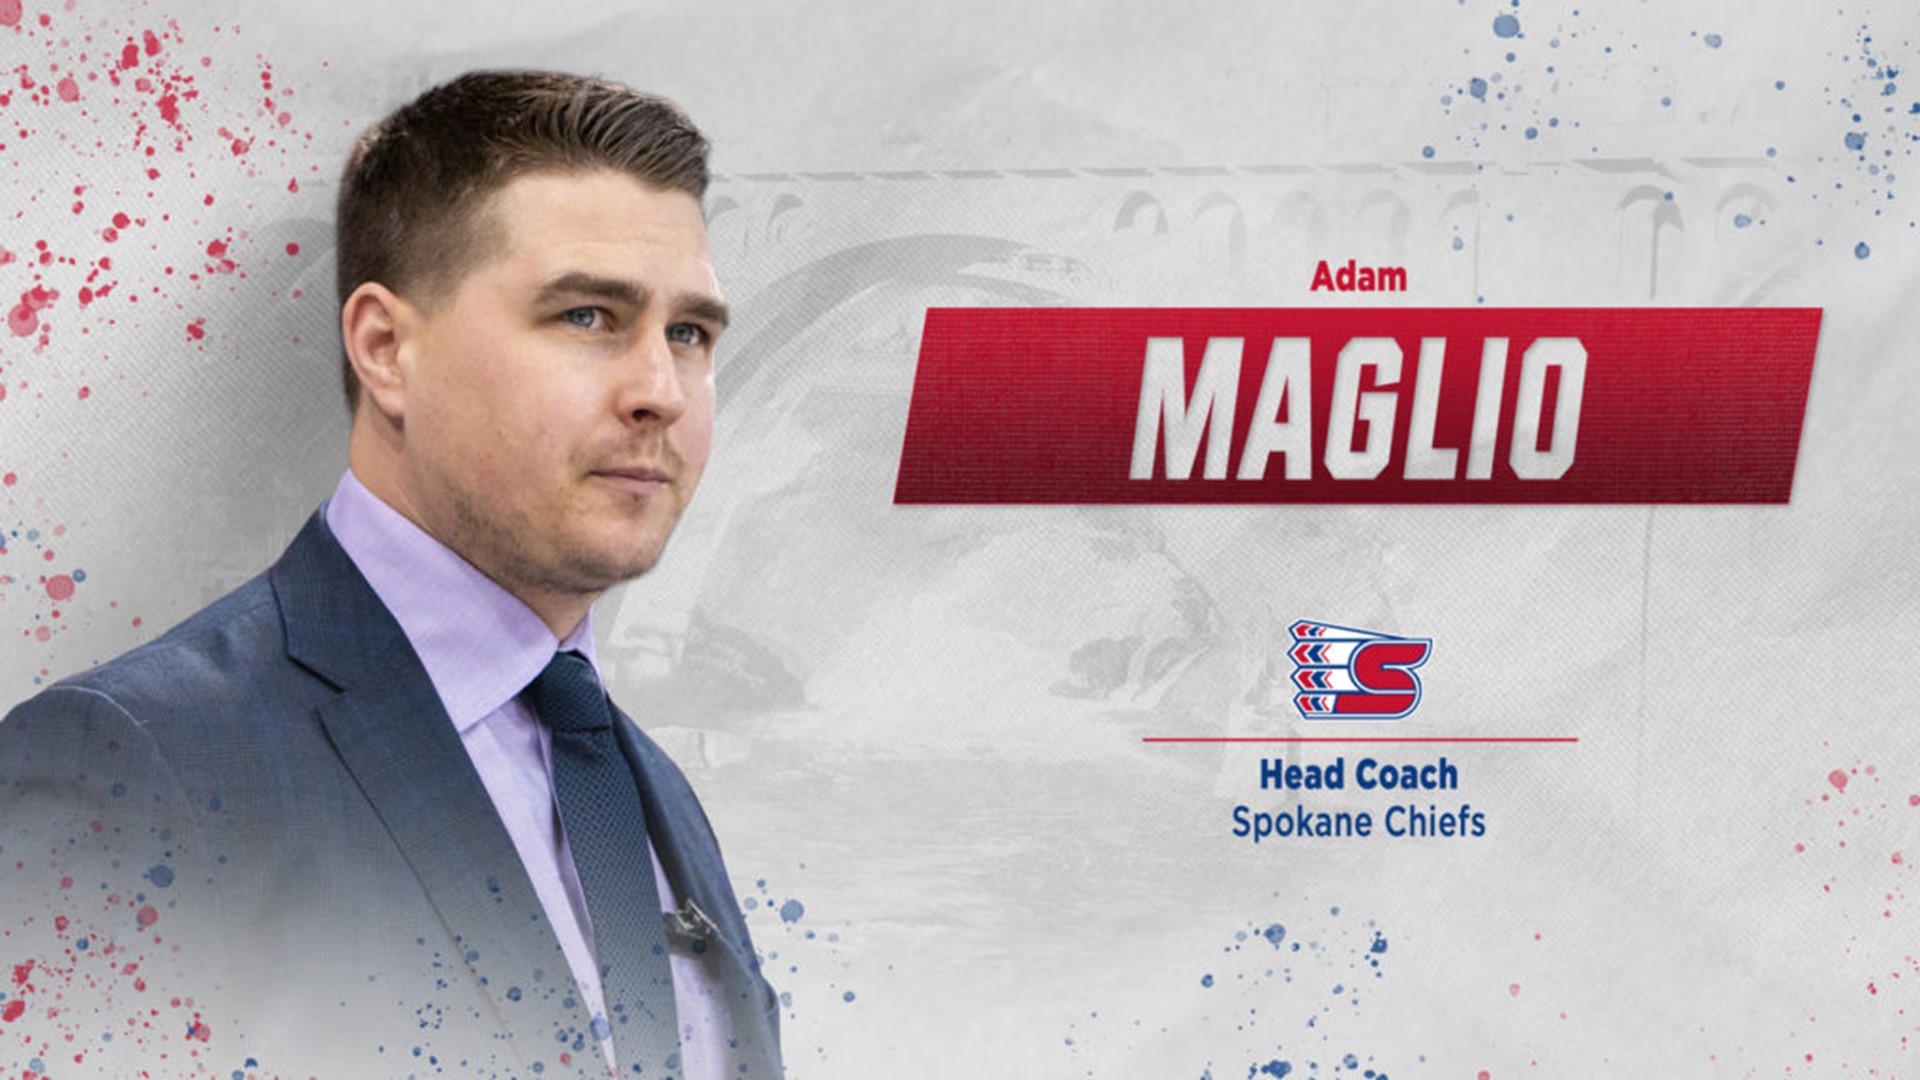 Just a day after the Chiefs' former head coach Manny Viveiros left for a job in the AHL, the Chiefs have a new man in charge.